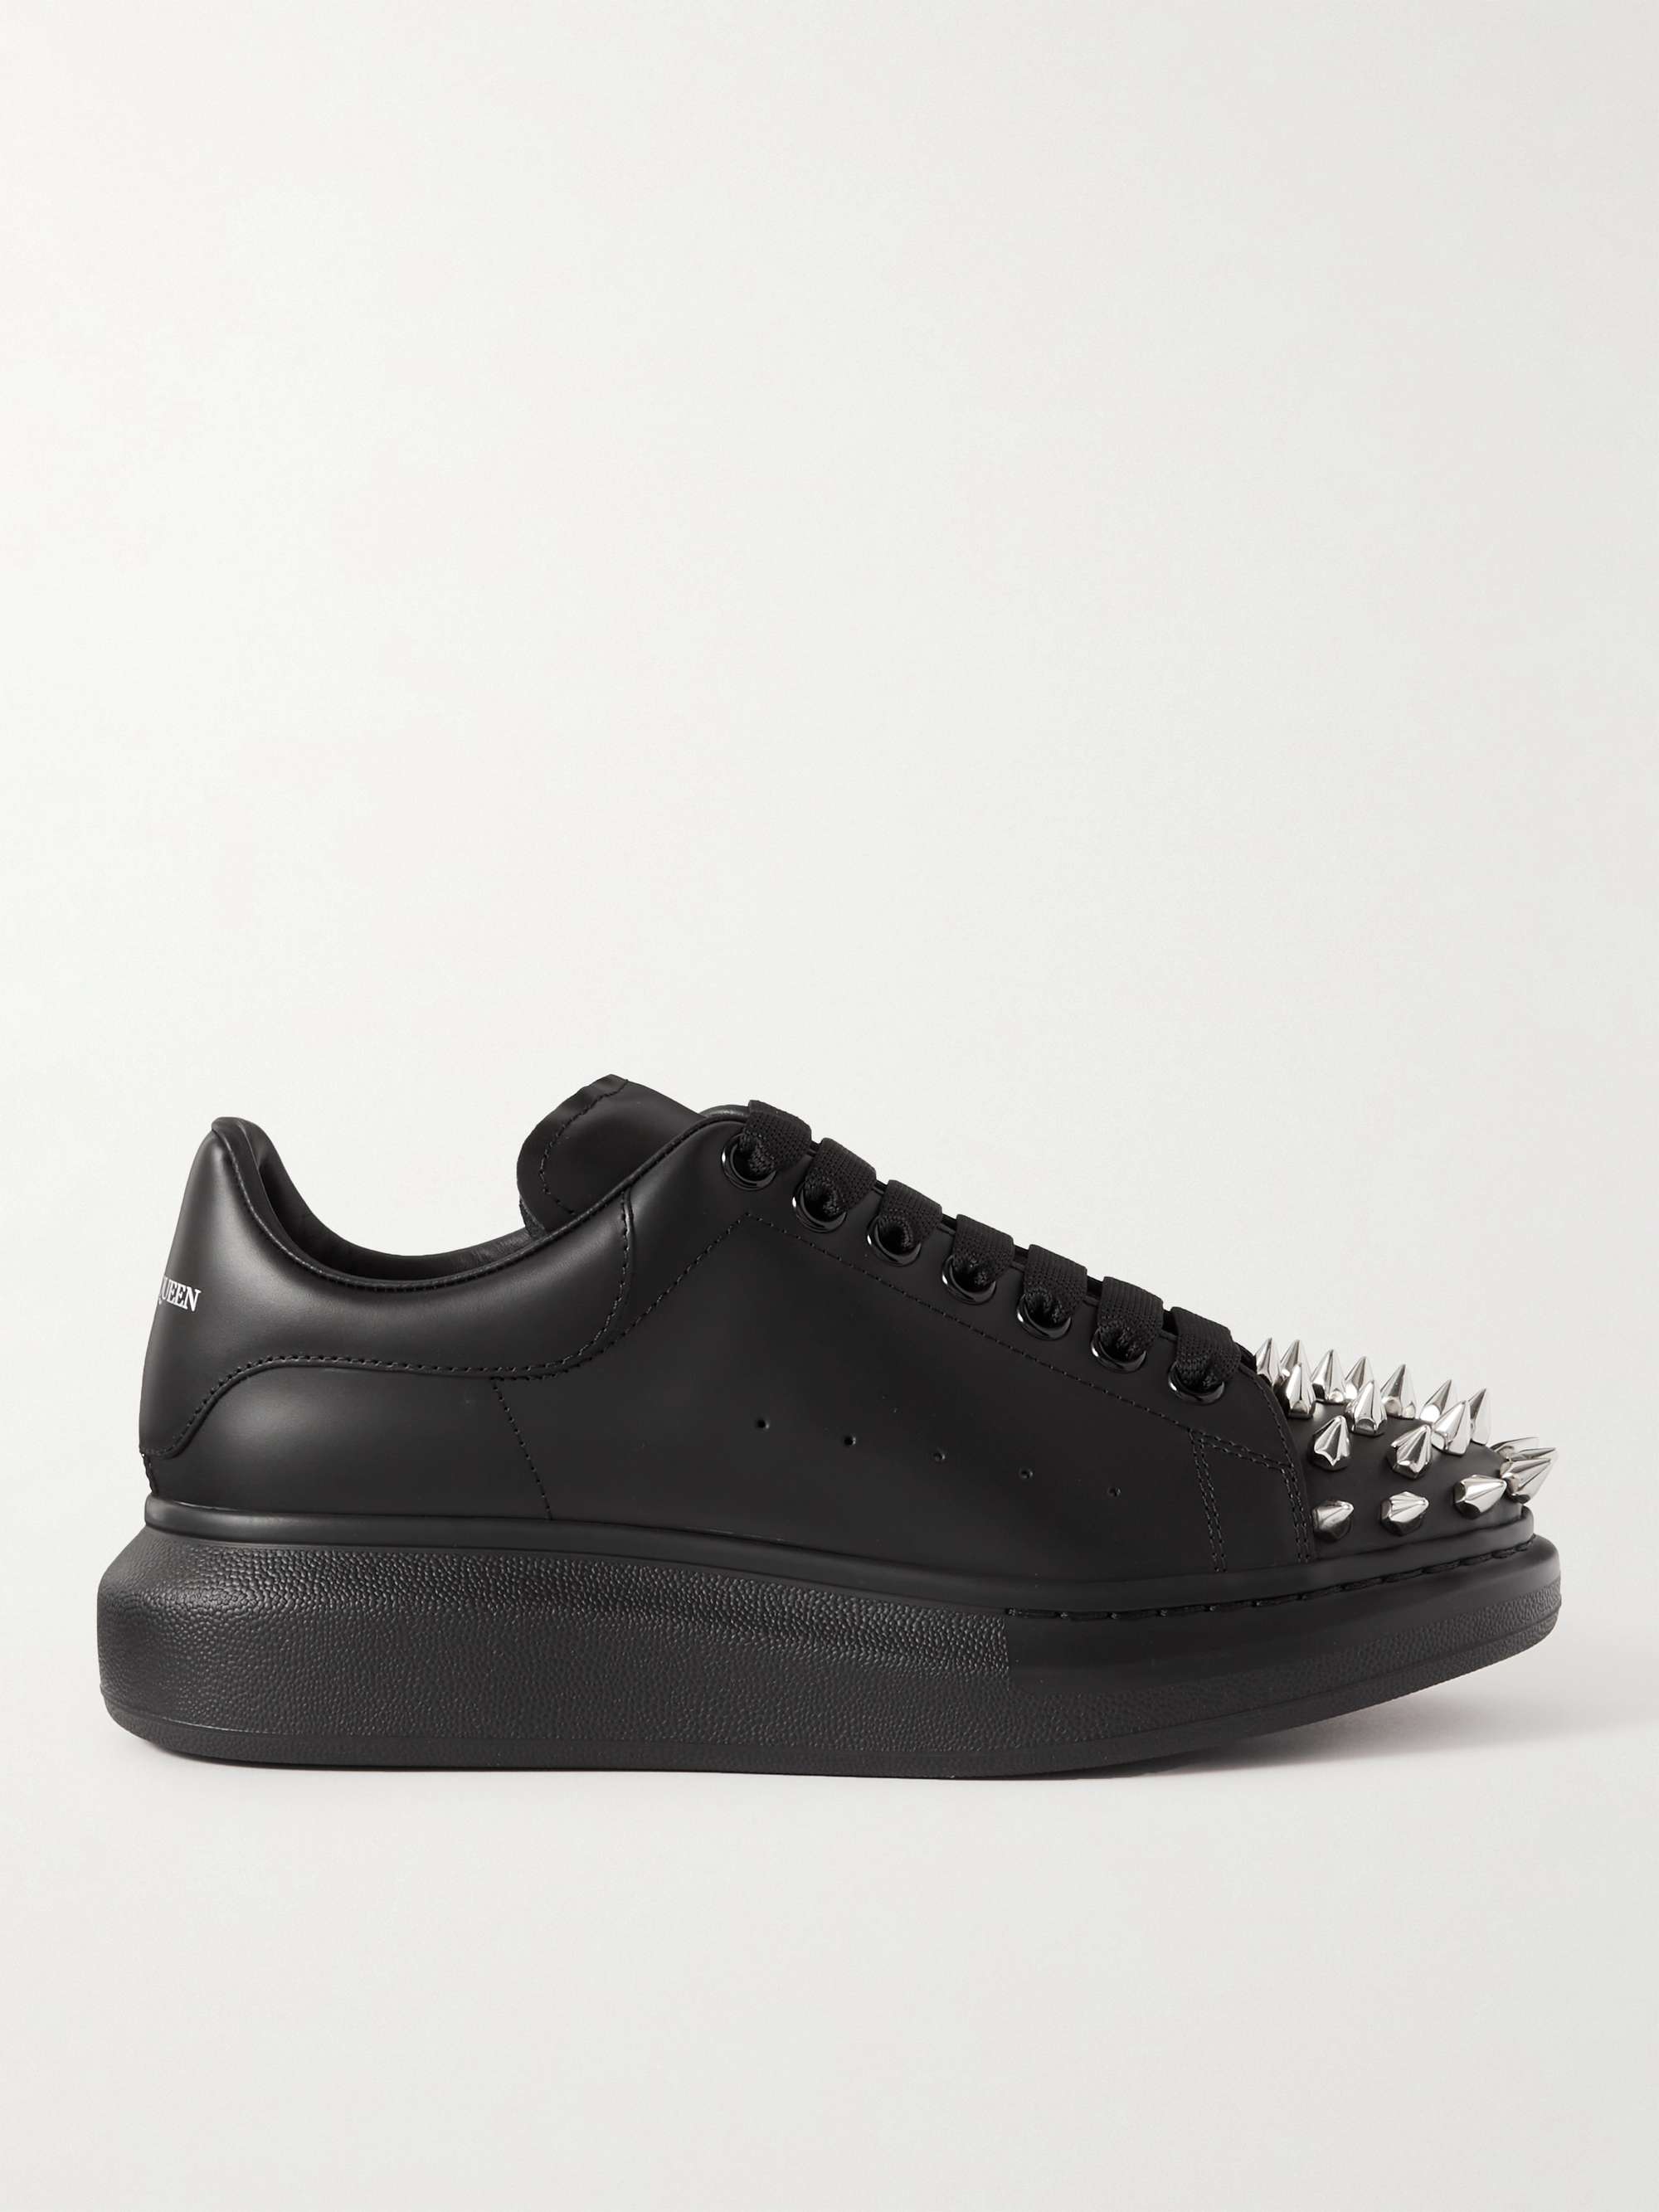 Black Exaggerated-Sole Spiked Leather Sneakers | ALEXANDER MCQUEEN | MR ...